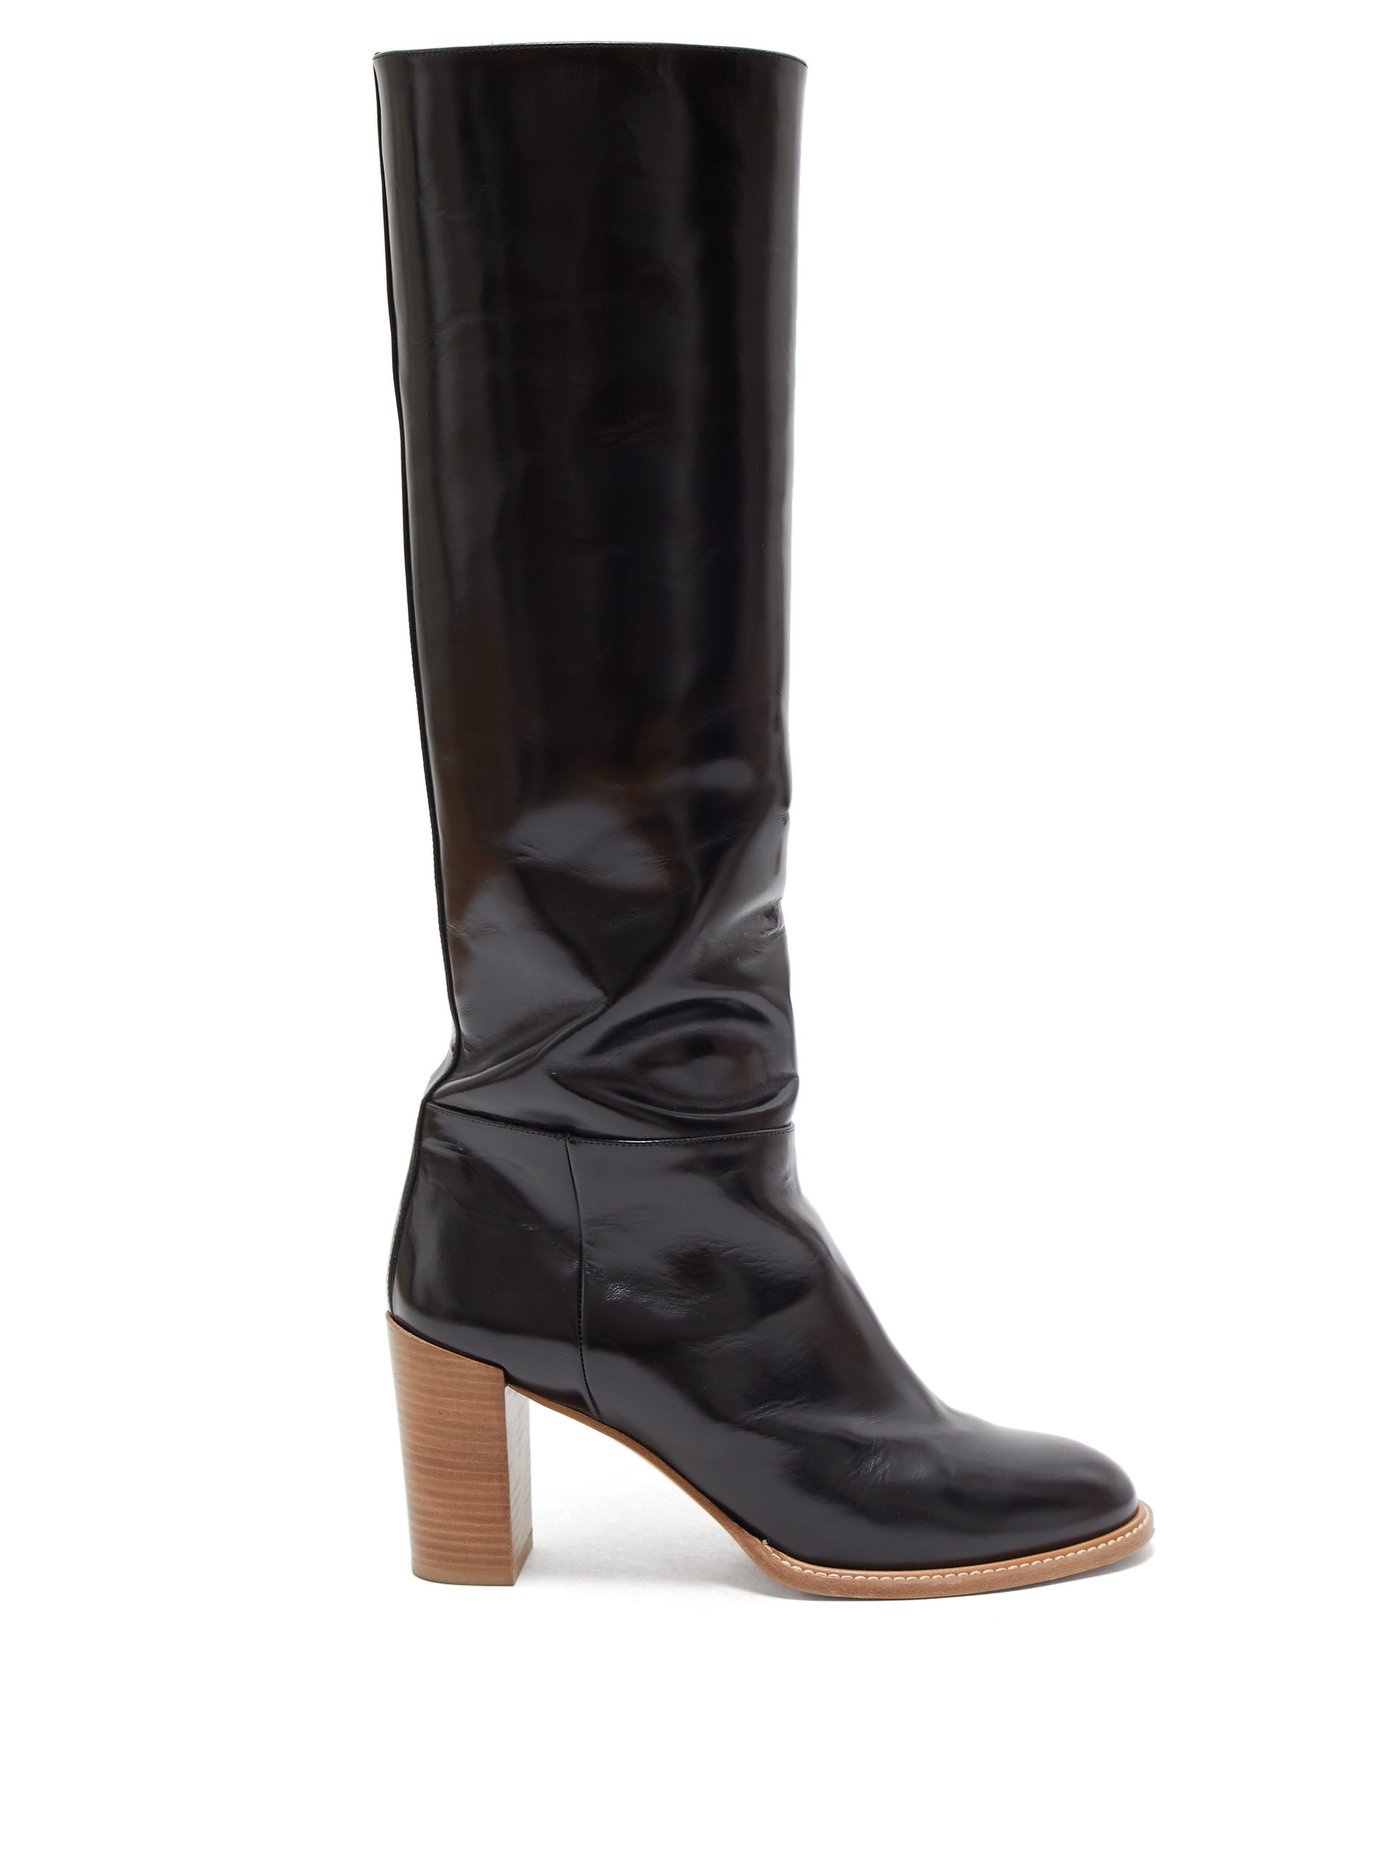 knee high leather boots uk